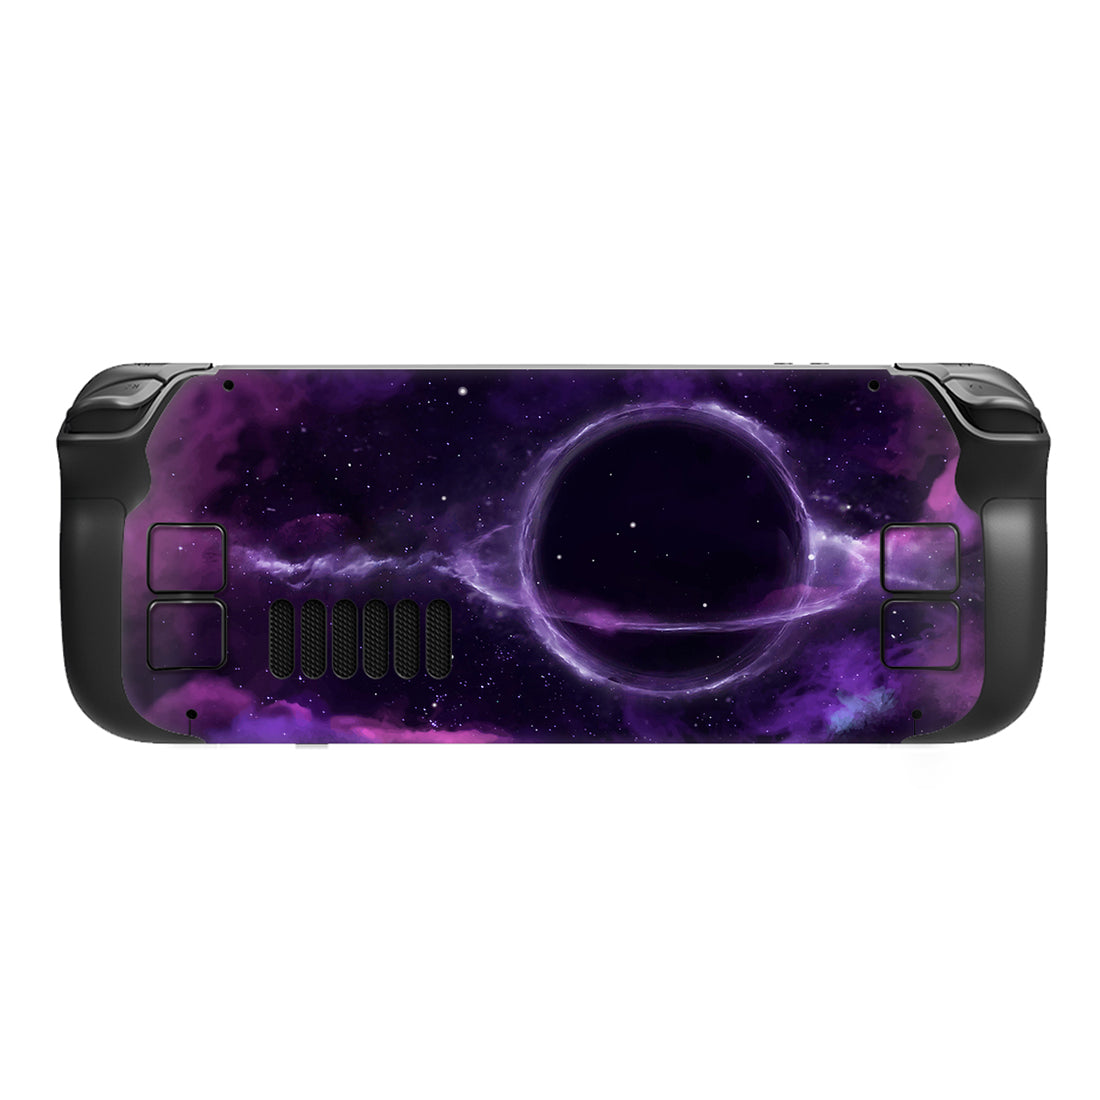 PlayVital Full Set Protective Skin Decal for Steam Deck, Custom Stickers Vinyl Cover for Steam Deck Handheld Gaming PC - Purple Deep Space - SDTM020 playvital